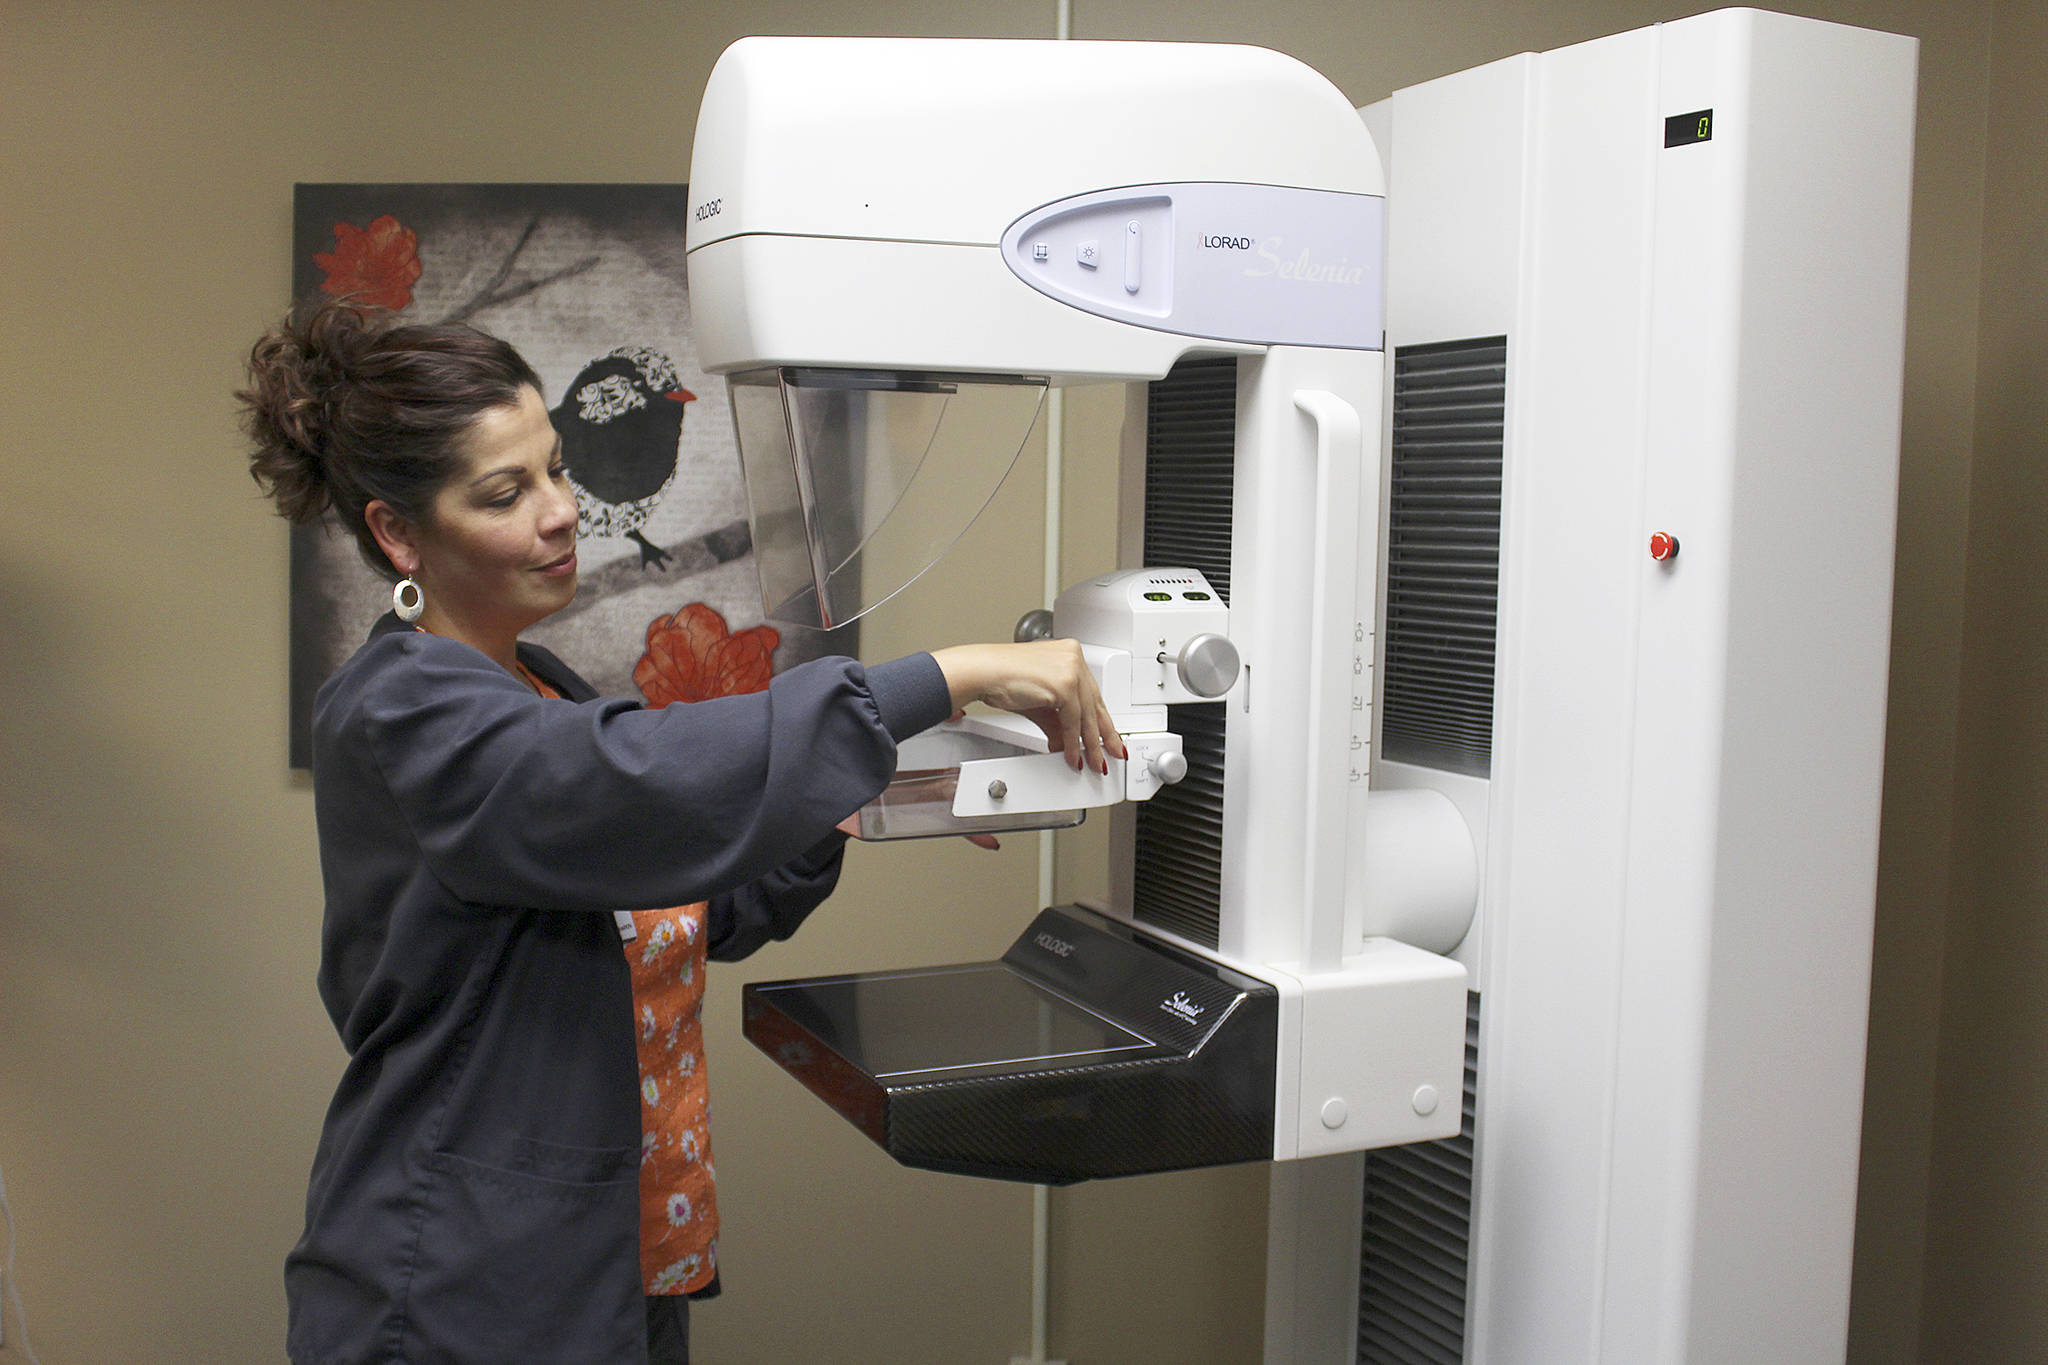 Stephanie George, lead mammogram technician at WhidbeyHealth Medical Center, cleans the imaging machine in between patients. Photos by Patricia Guthrie/Whidbey News-Times